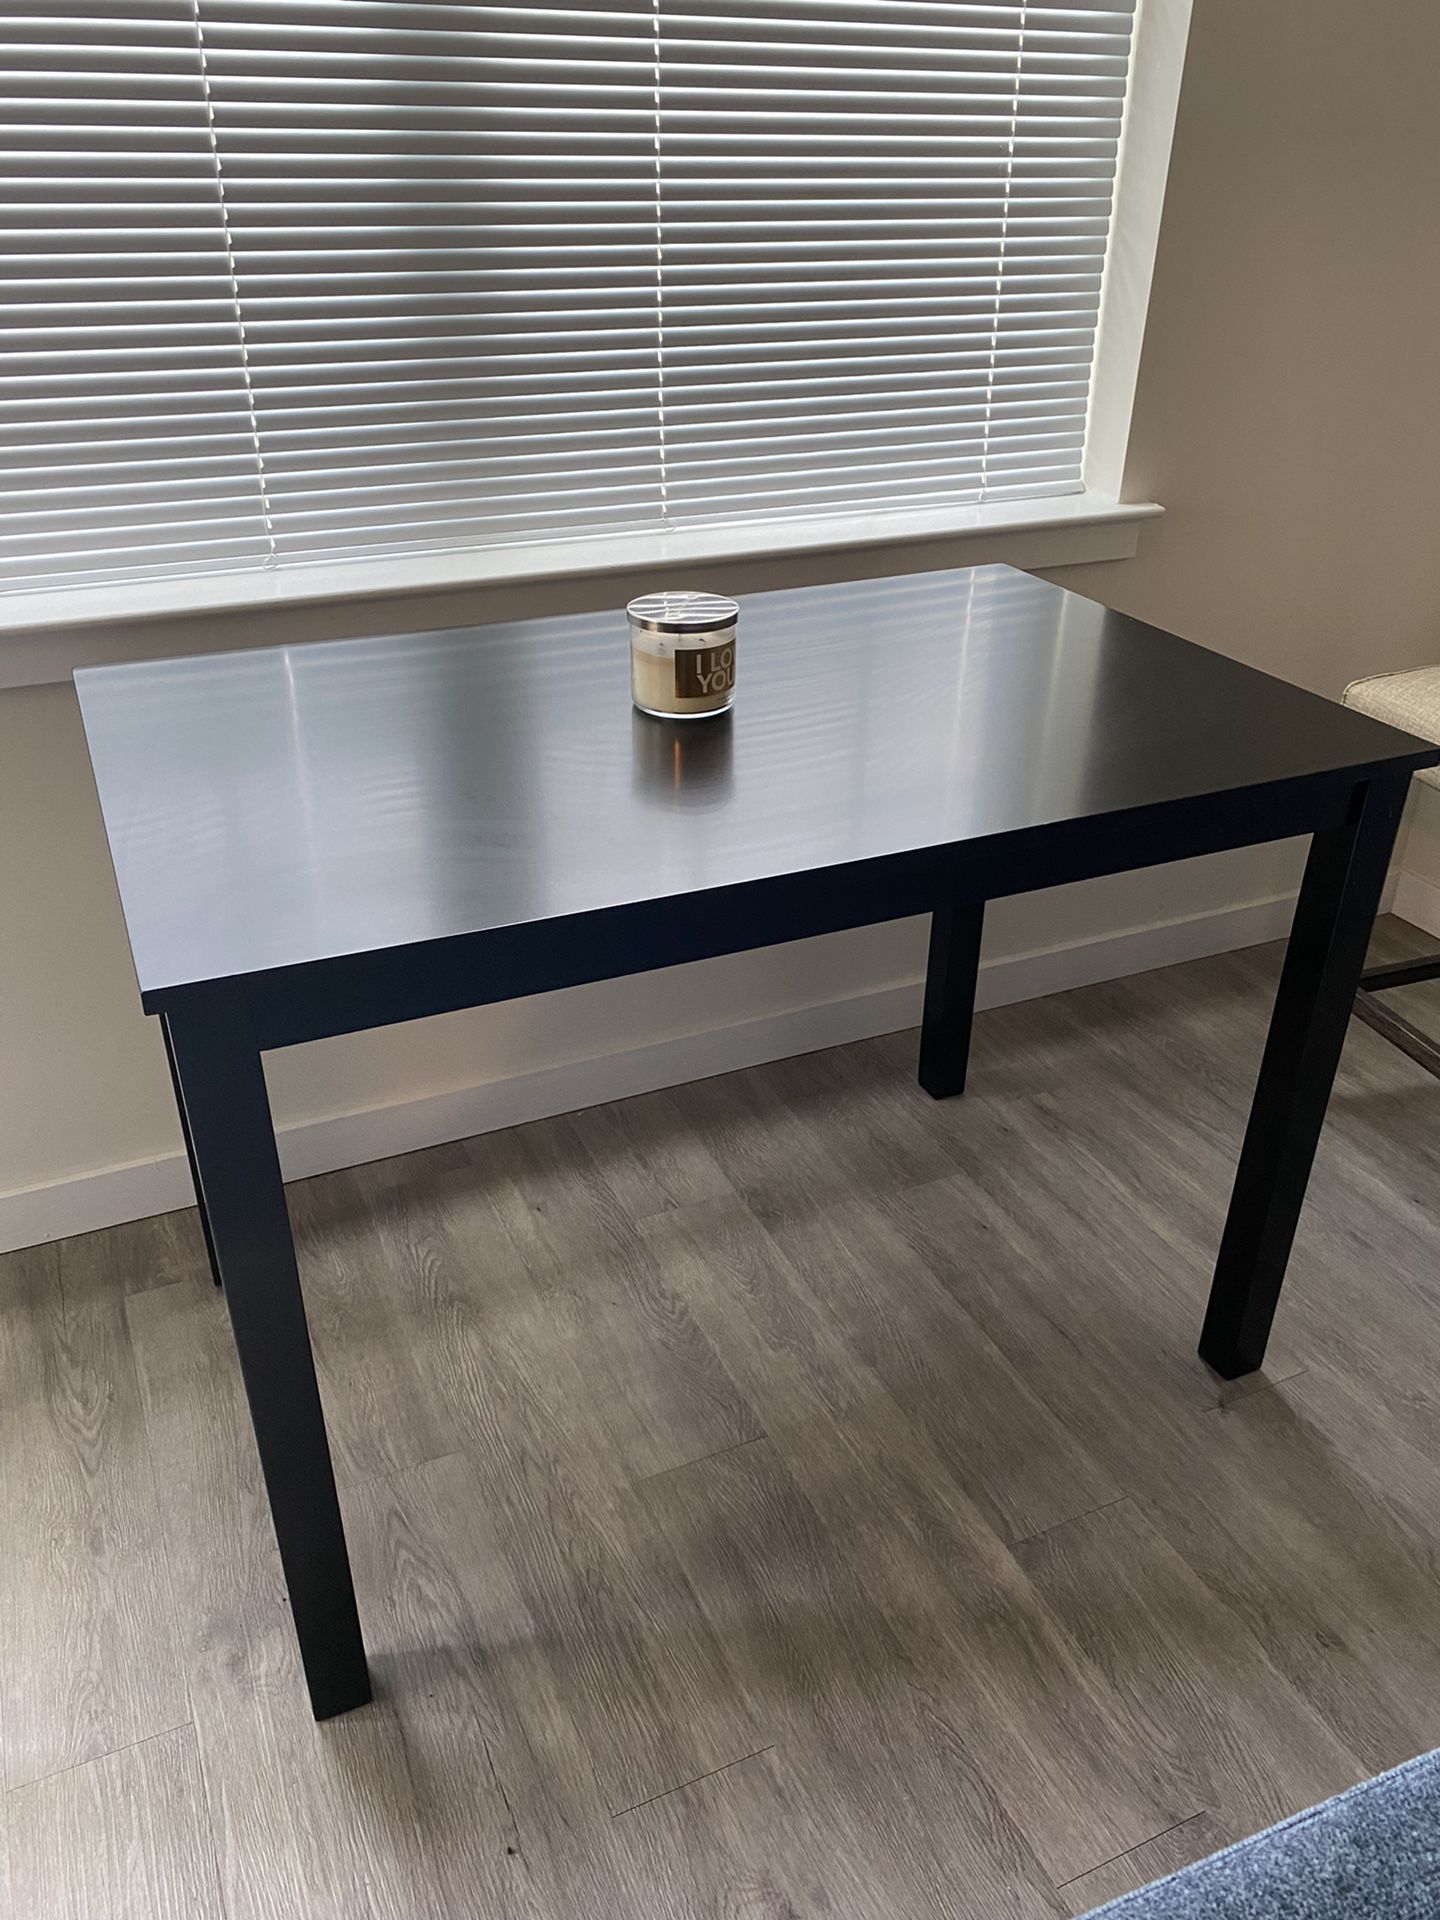 Small Desk/ Work Table/ Dining Table $28